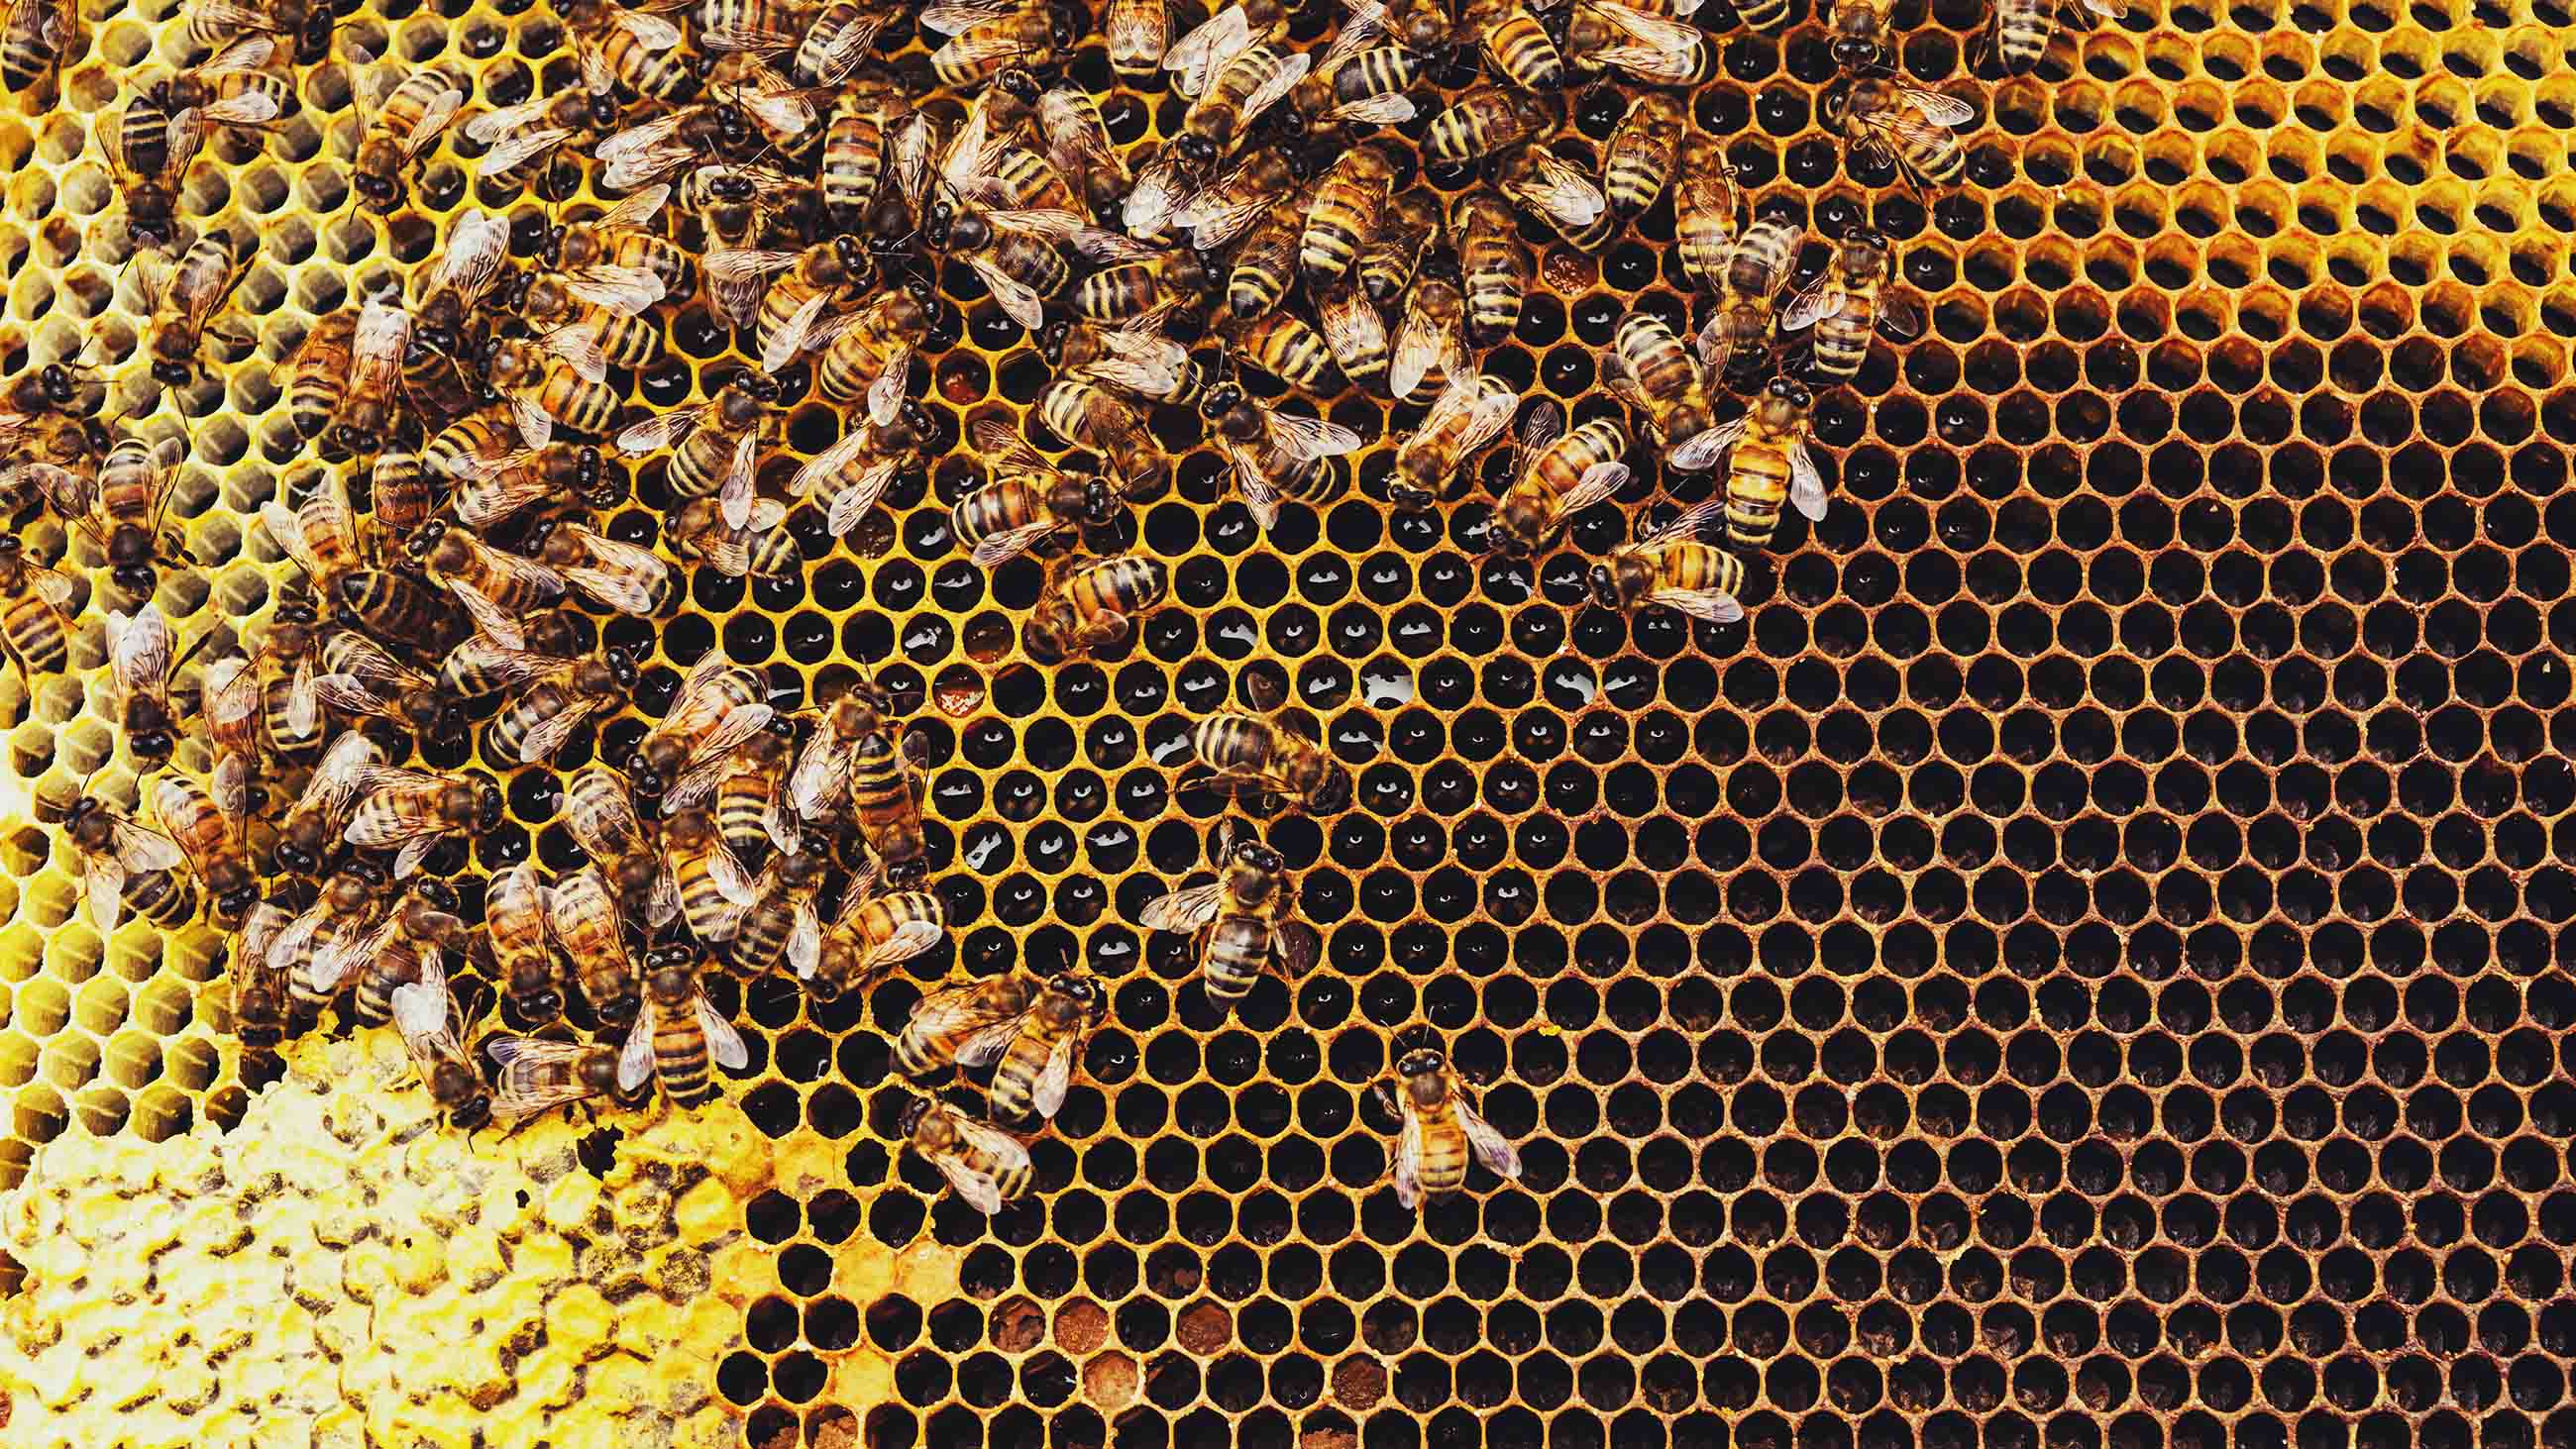 Bees might well be smarter than we realize, but chemical pesticides are scrambling their brains.